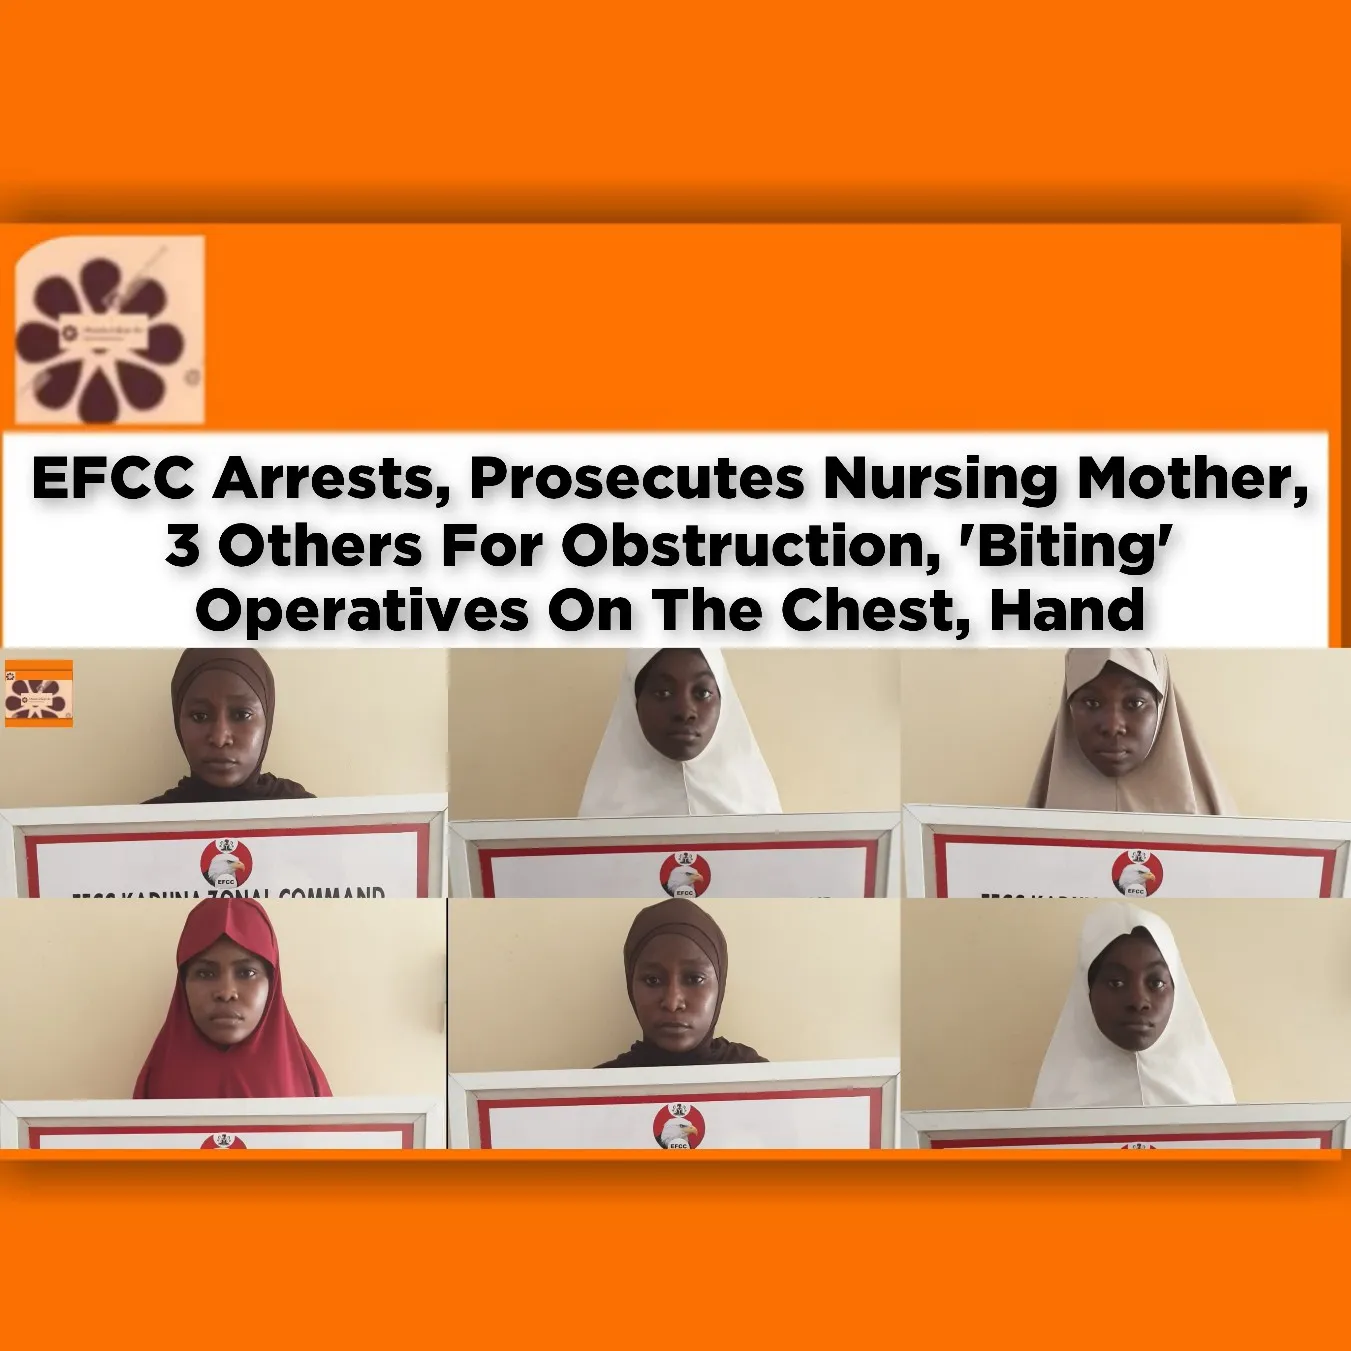 EFCC Arrests, Prosecutes Nursing Mother, 3 Others For Obstruction, 'Biting' Operatives On The Chest, Hand ~ OsazuwaAkonedo #Bawa